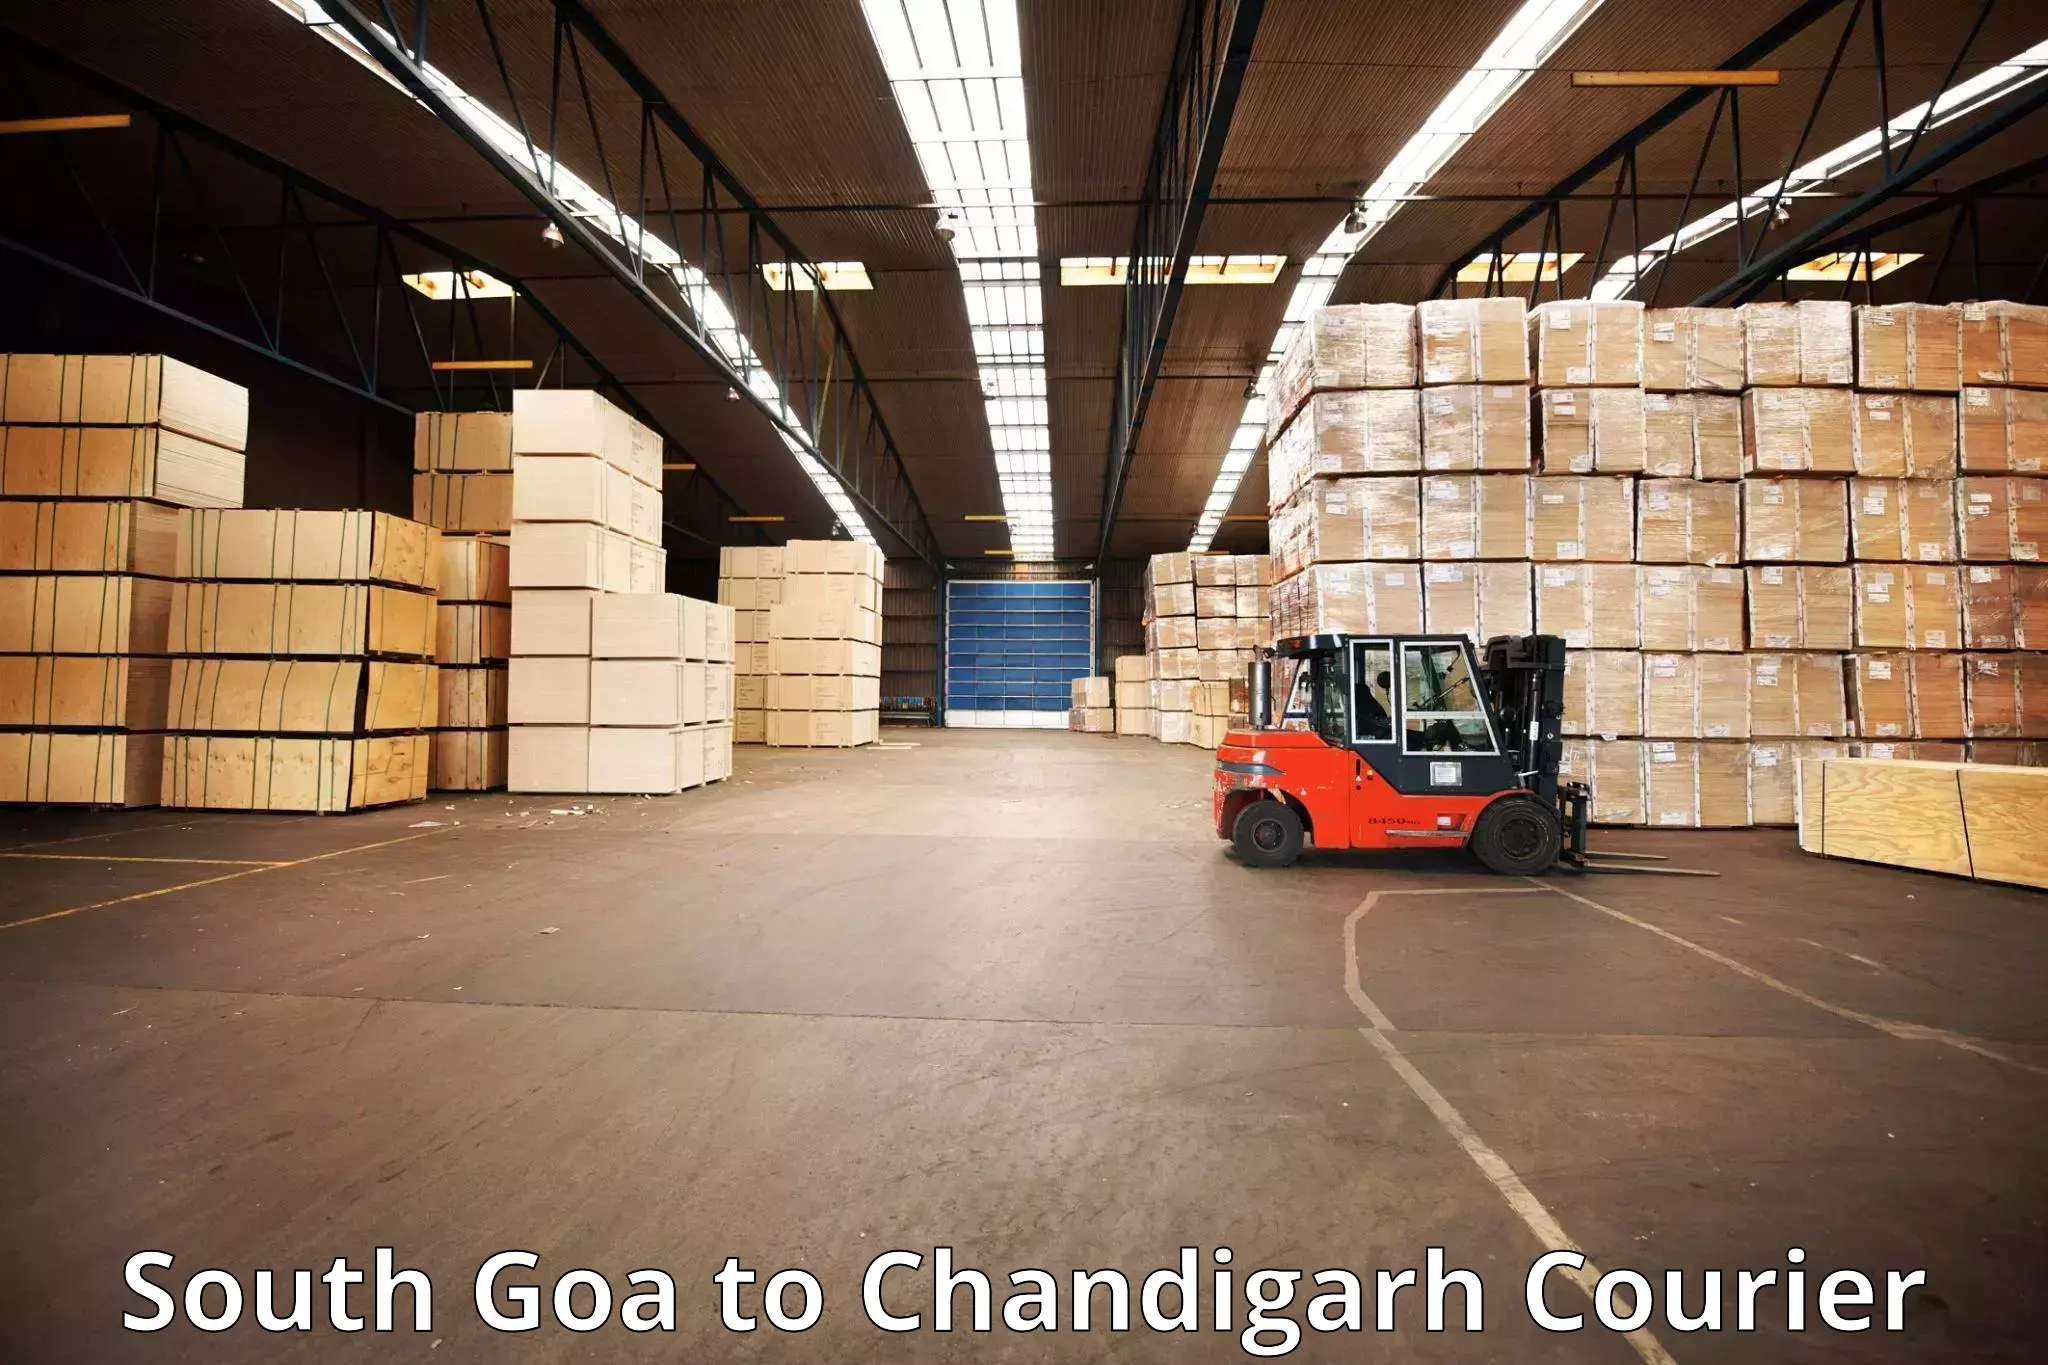 Luggage transport service South Goa to Chandigarh